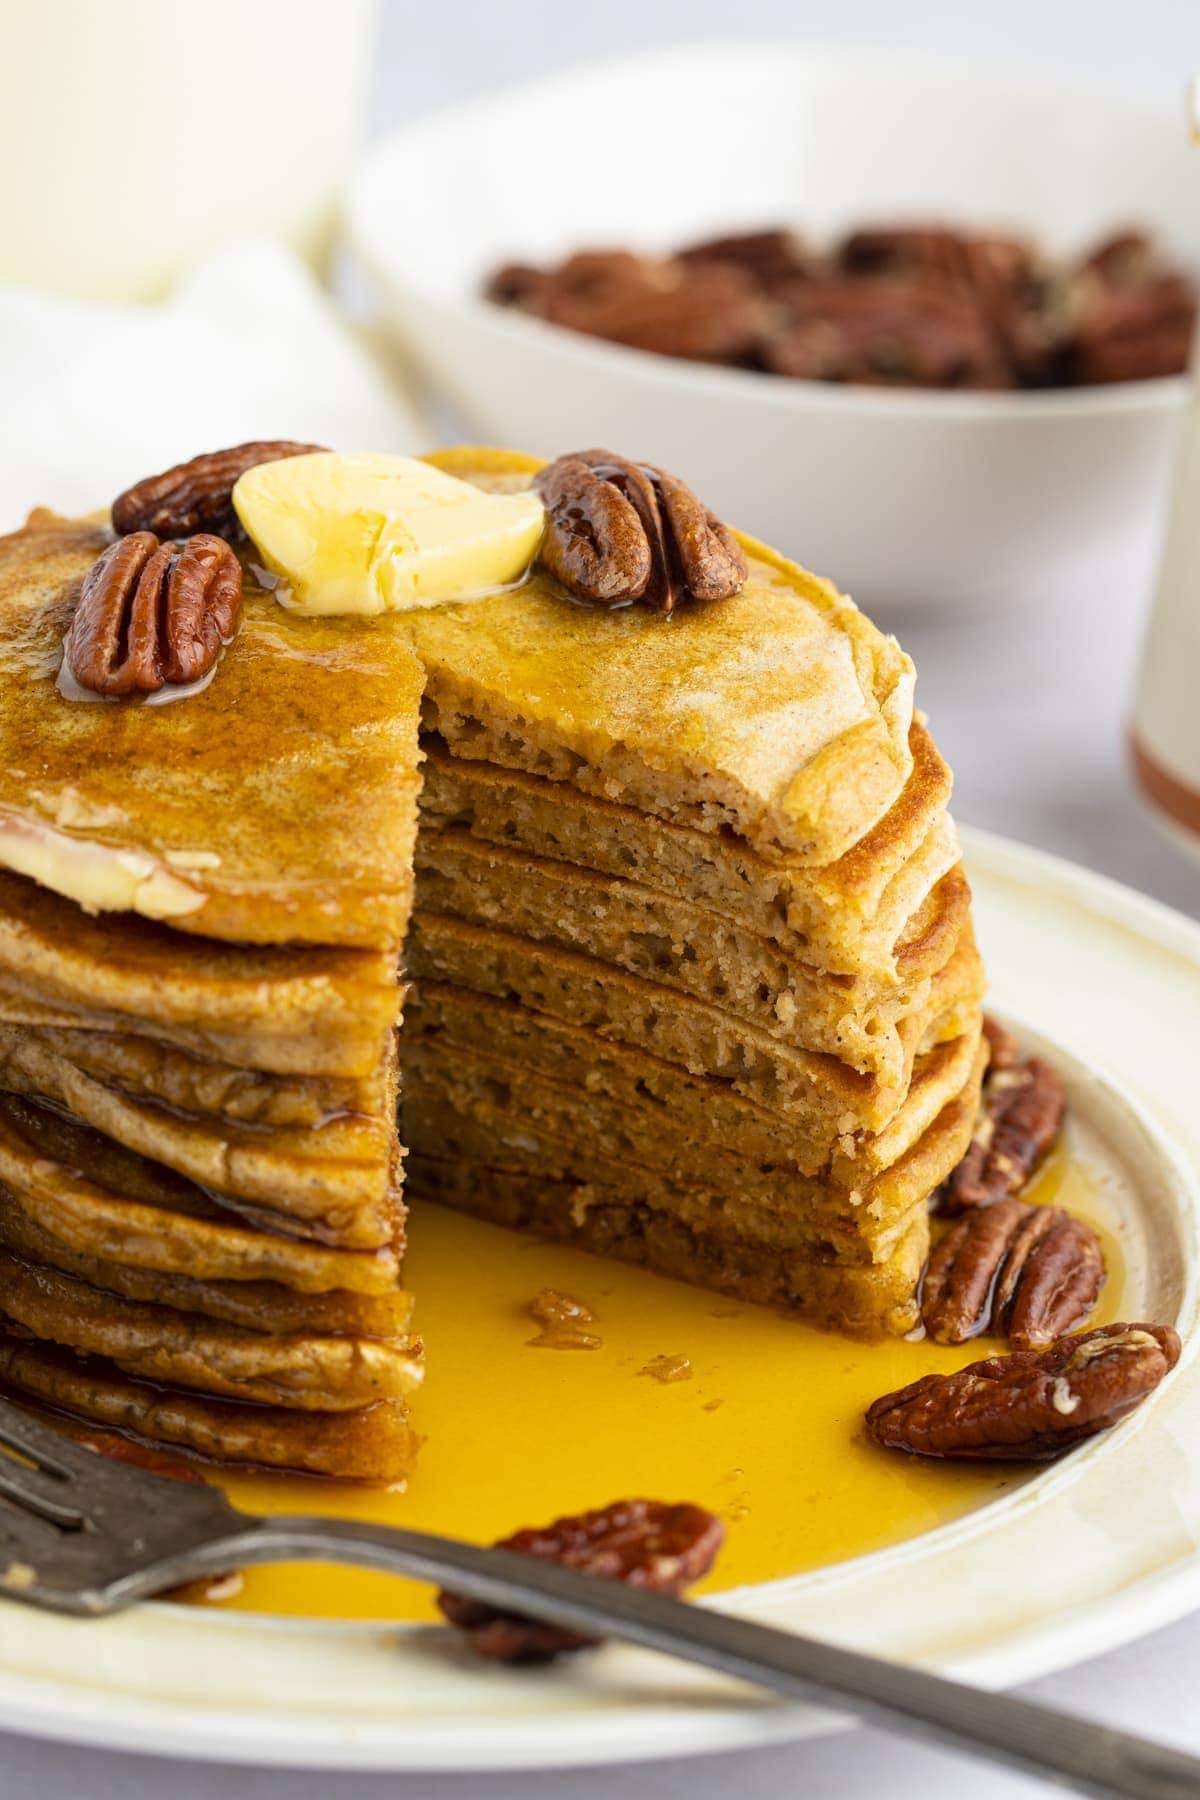 A stack of sweet potato pancakes topped with roasted pecans and butter, with a triangular wedge cut out of the pancakes and resting on a fork.